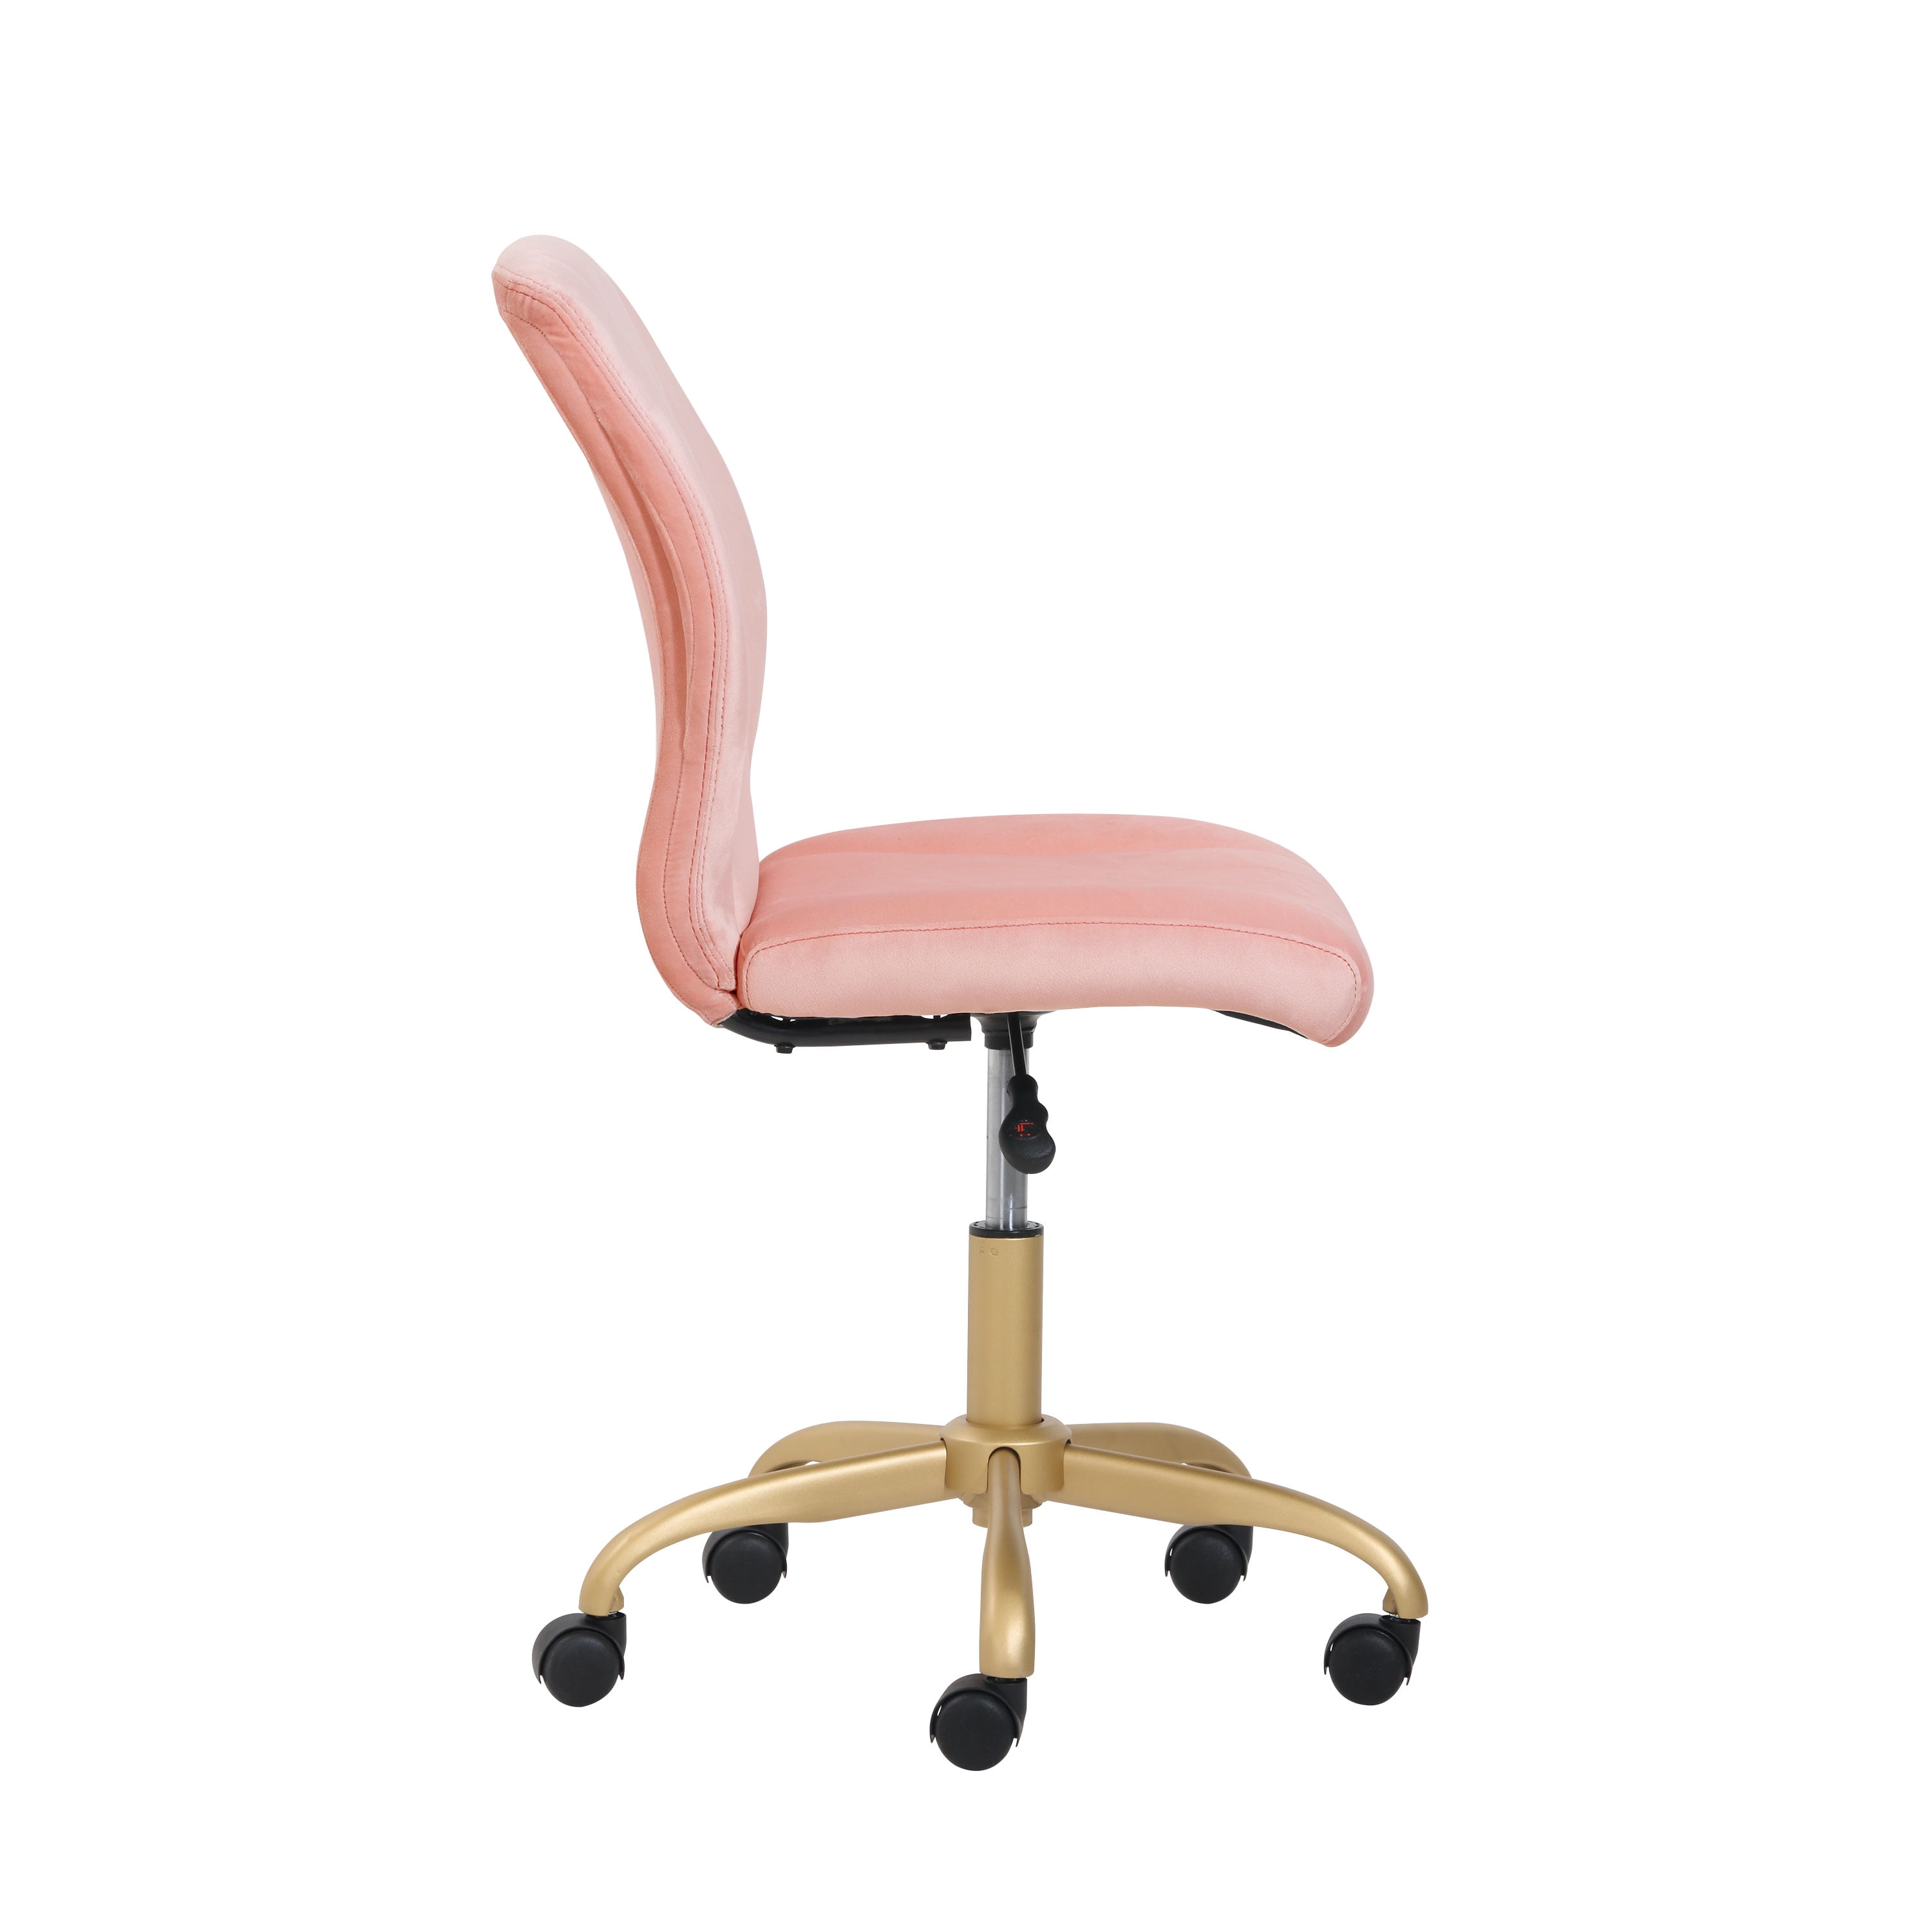 Mainstays Plush Velvet Office Chair Pearl Blush Walmart Com Walmart Com Our children's table and chairs are made with your little one in mind, they're the perfect size for them to sit and enjoy their dinner or draw and be creative on. mainstays plush velvet office chair pearl blush